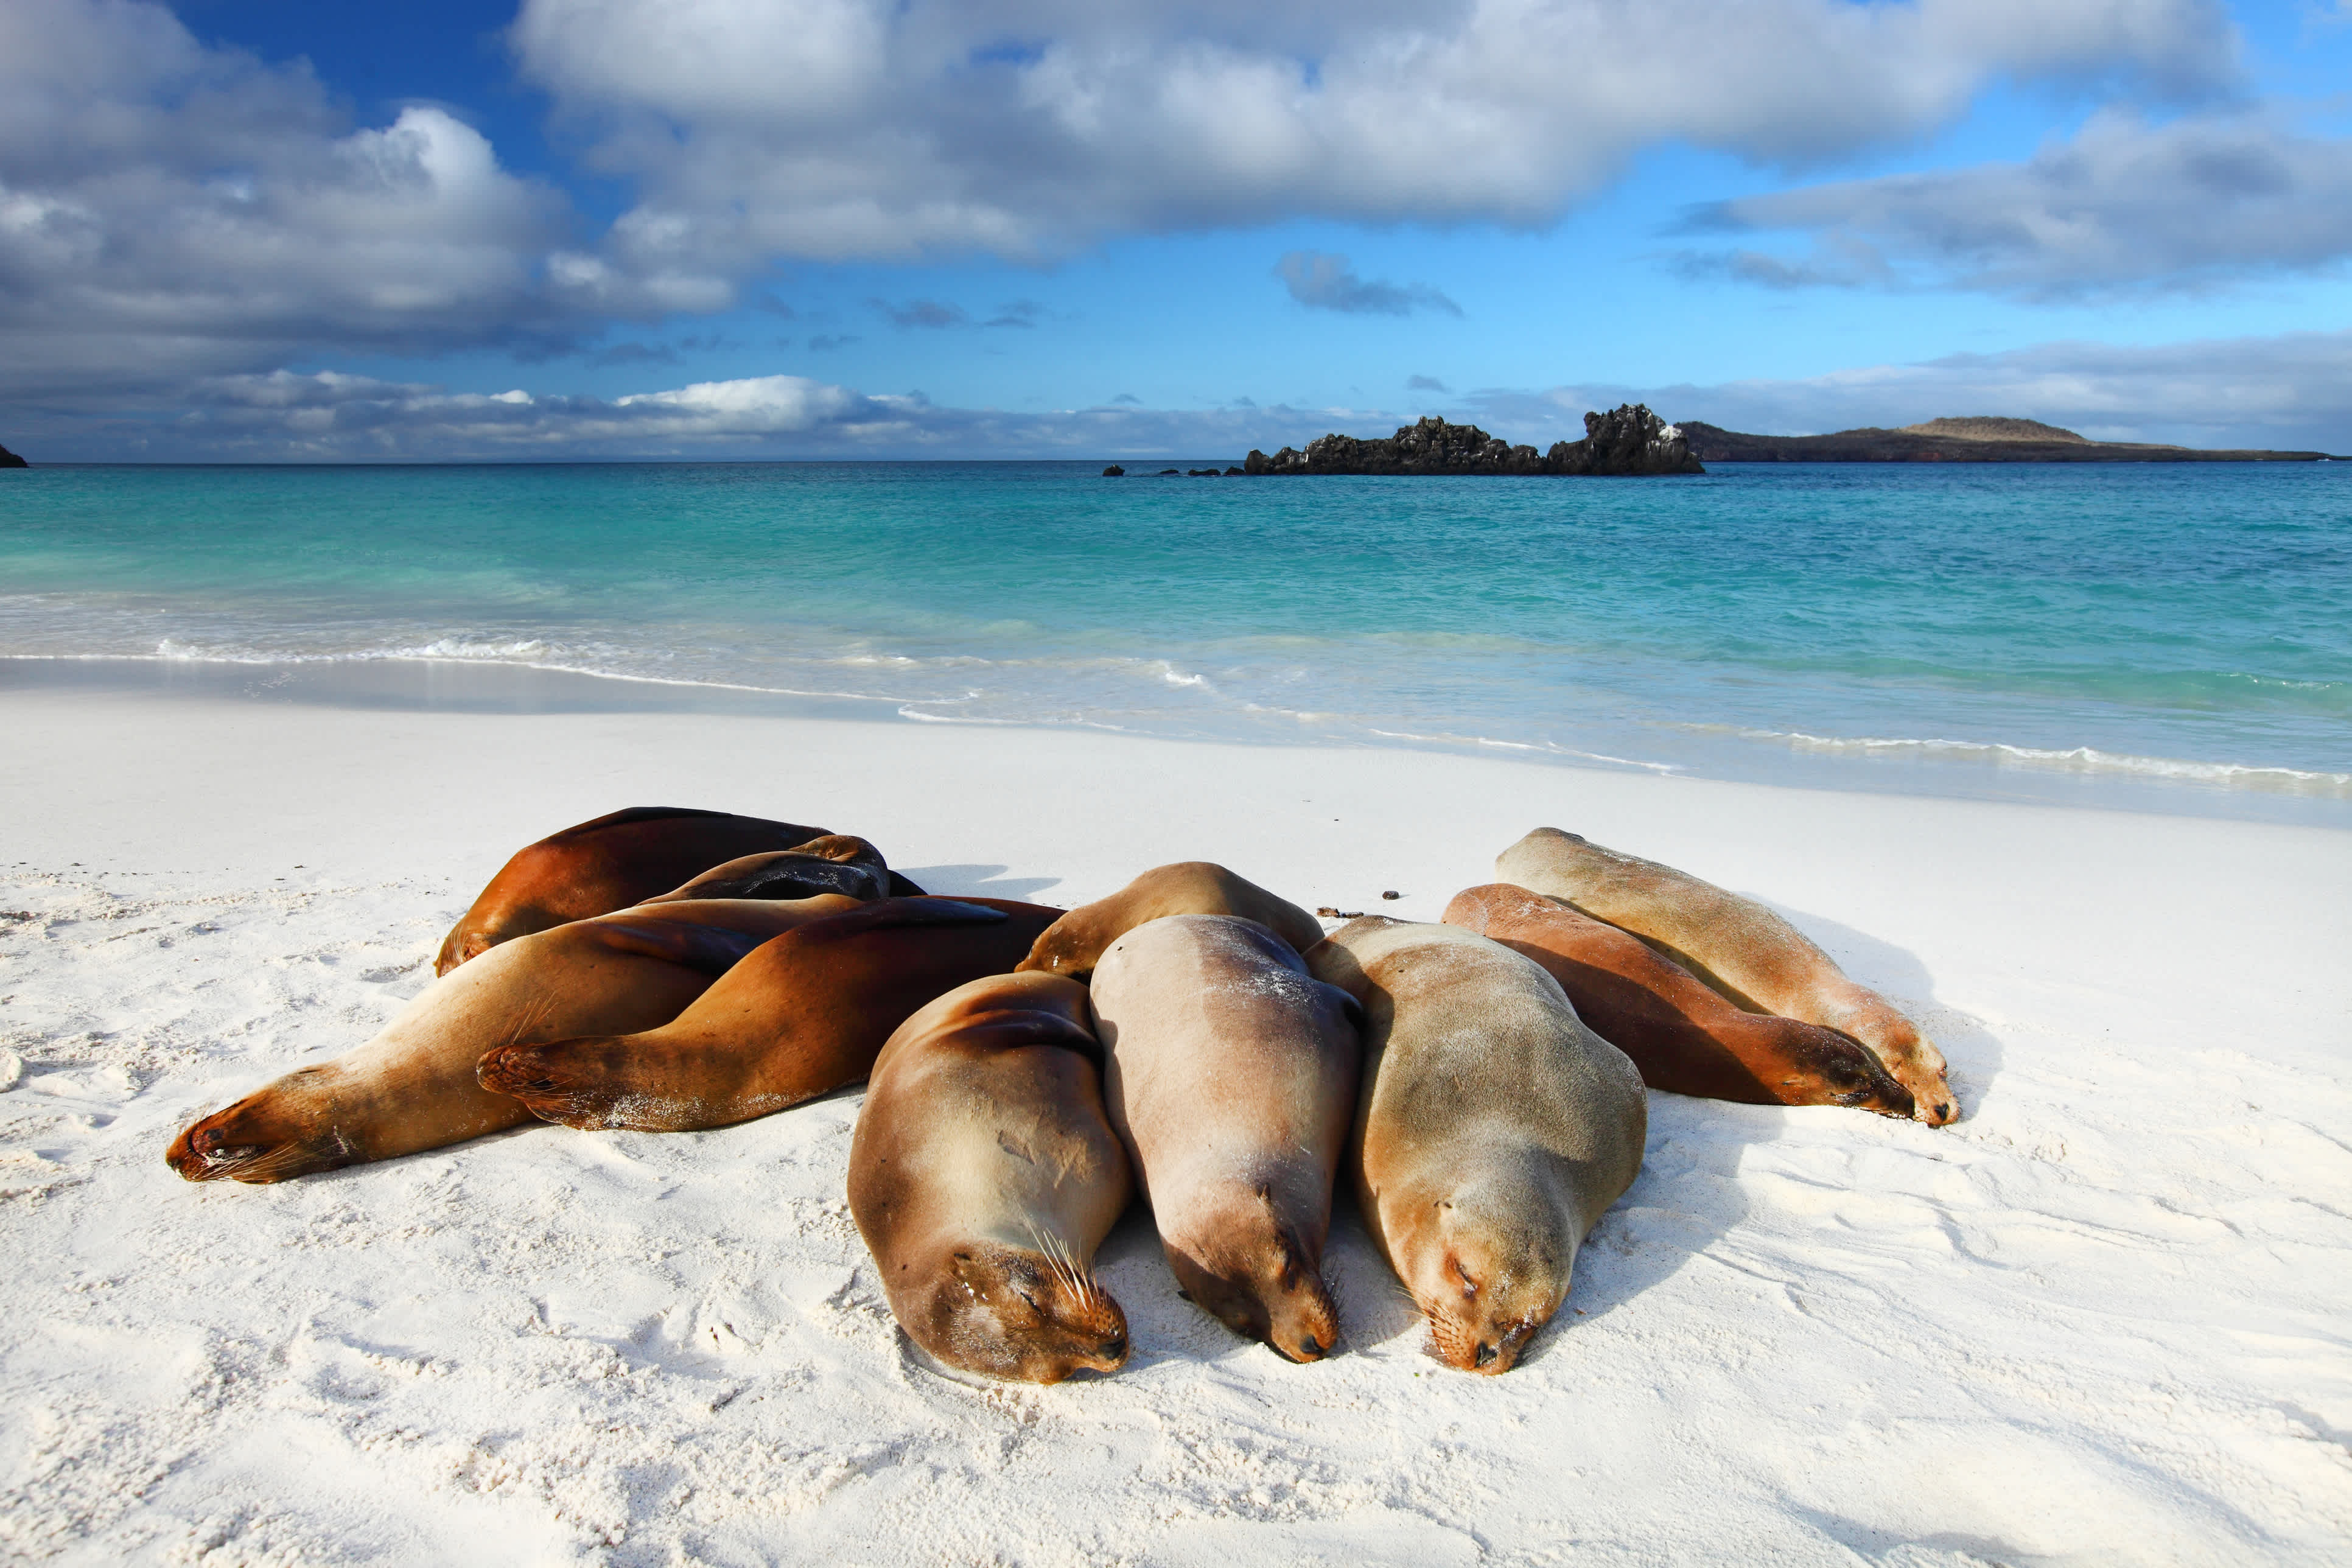 Galapagos Sea Lions Sonne selbst am Strand